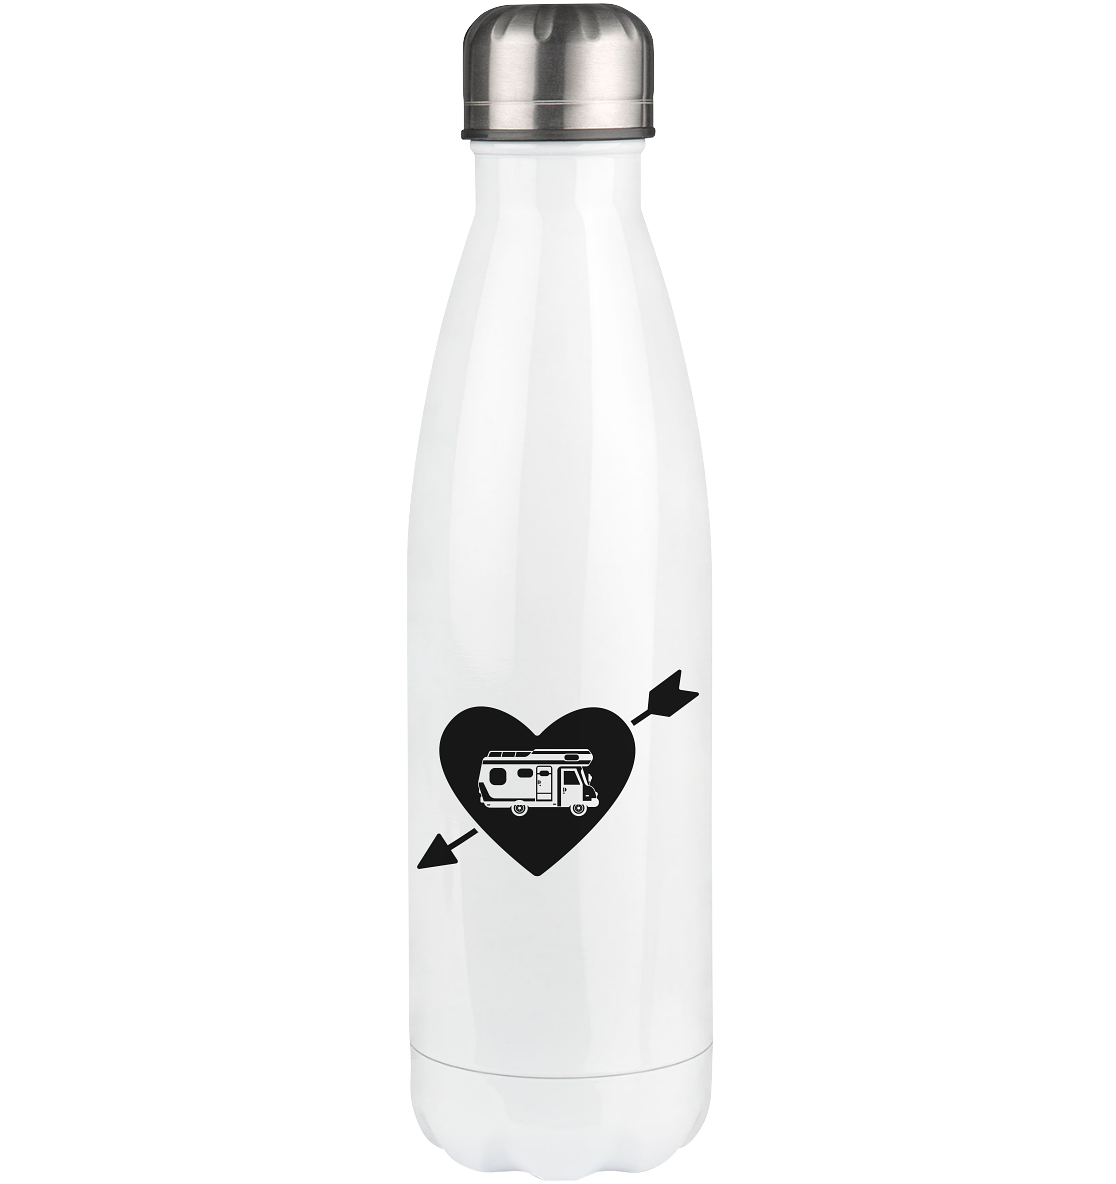 Arrow Heart and Camping - Edelstahl Thermosflasche camping UONP 500ml